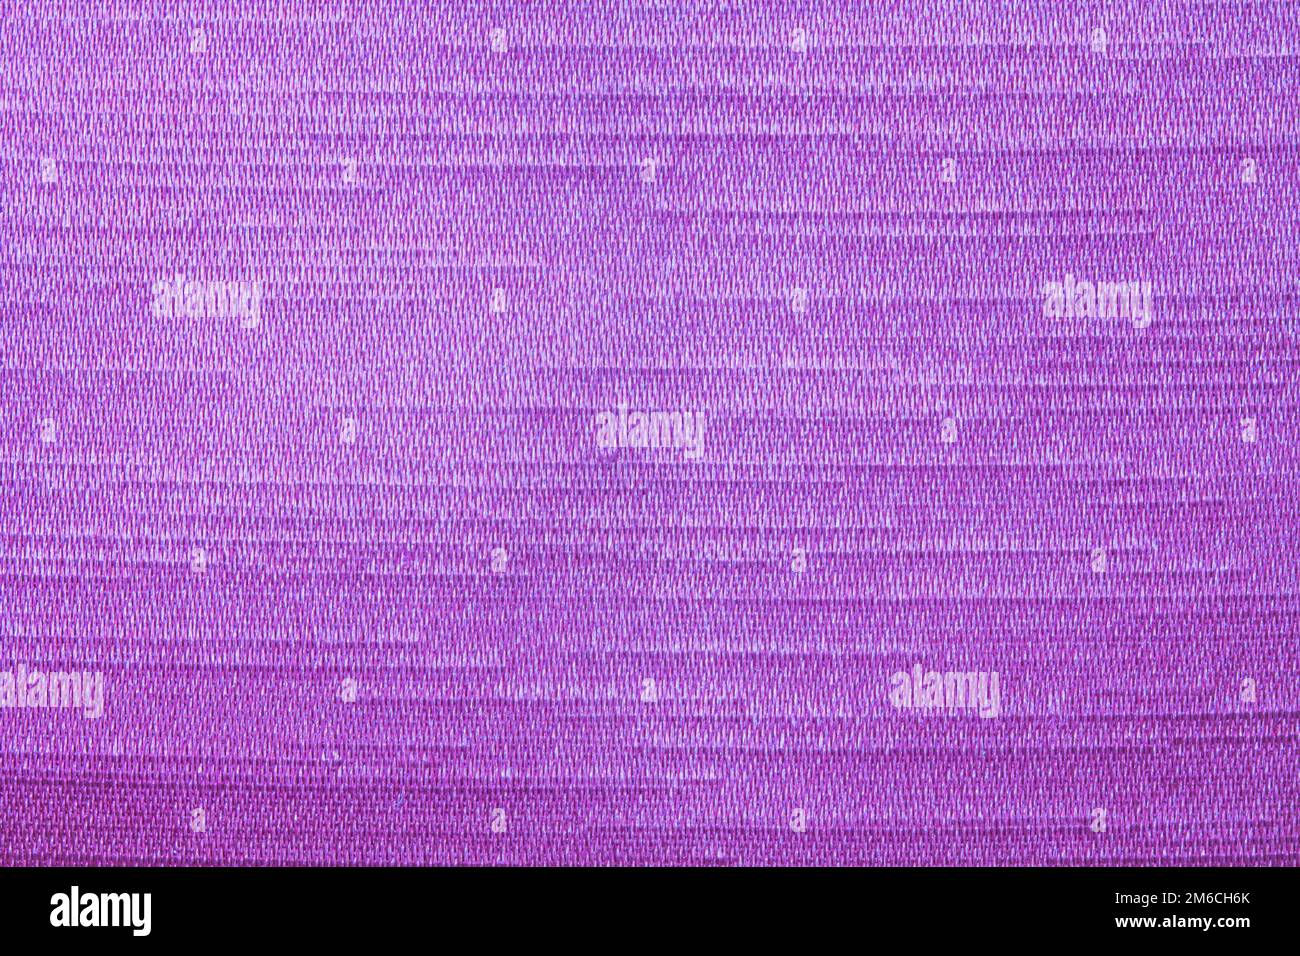 Texture of purple synthetic fabric Stock Photo